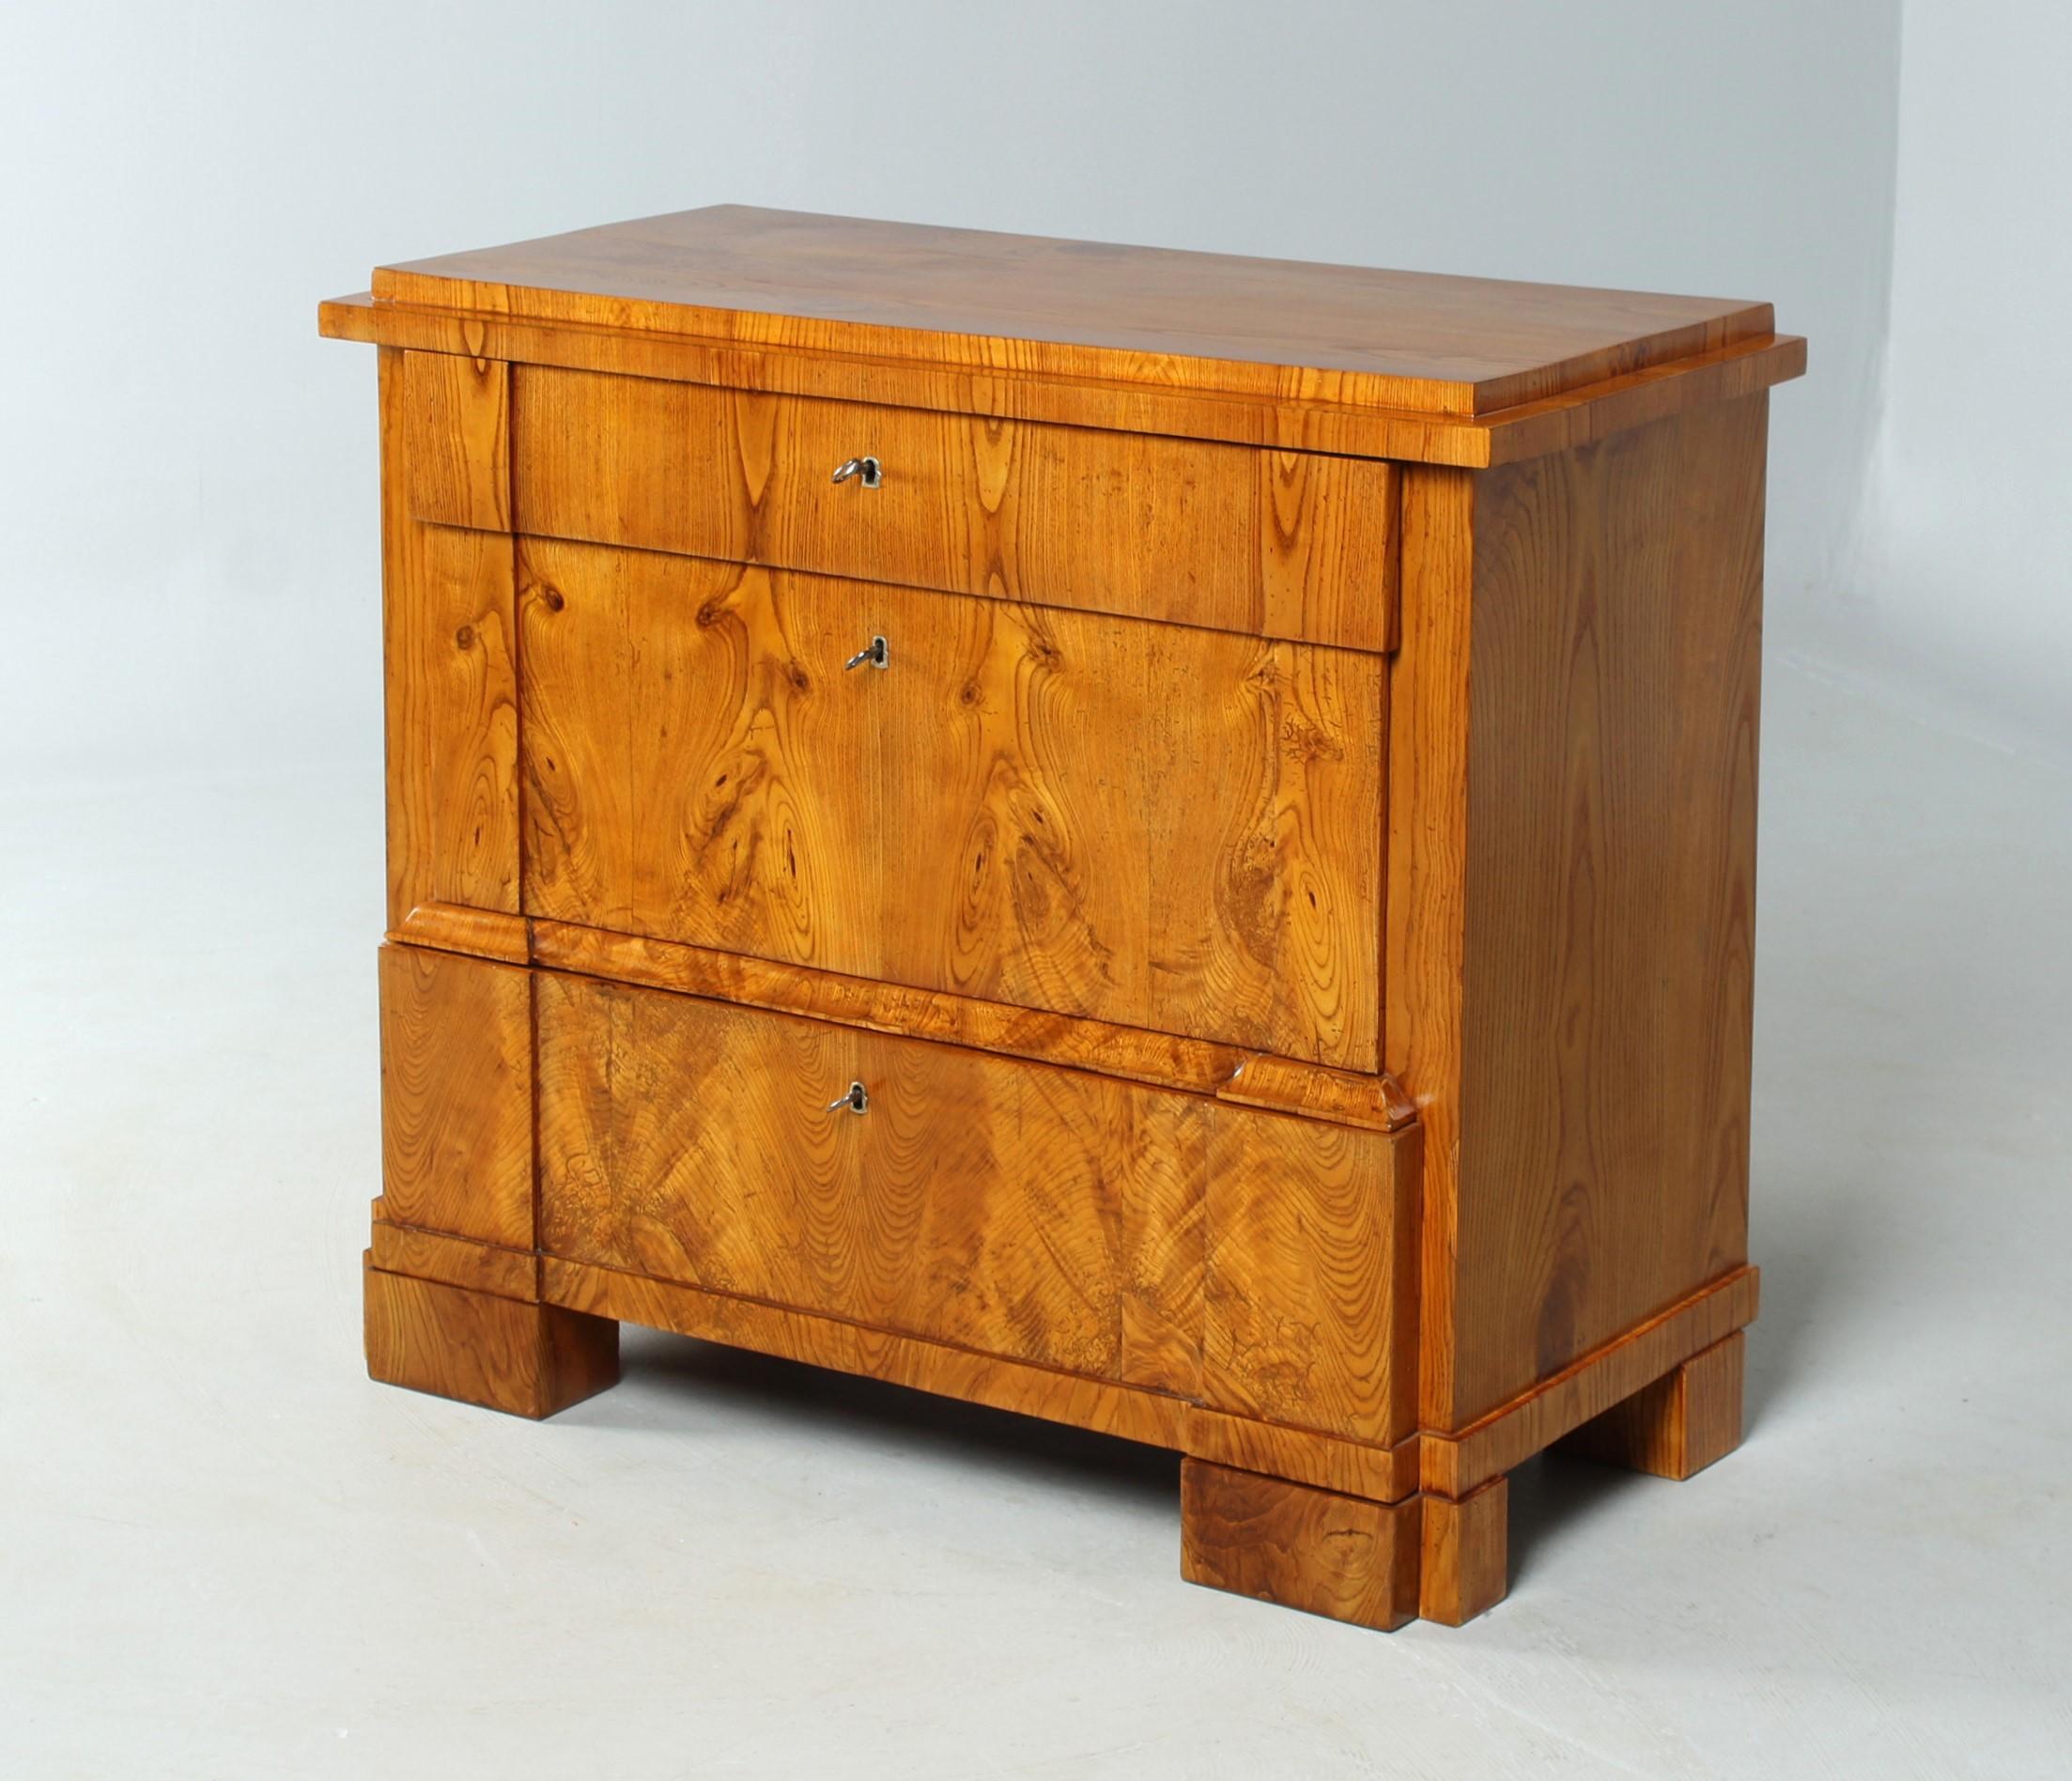 Dimensions: H x W x D: 85 x 97 x 46 cm

Small Biedermeier chest of drawers in ash veneer with typical North German double row of studded feet. Typical for the area are also the drawers protruding to different distances and the distinctive traverse